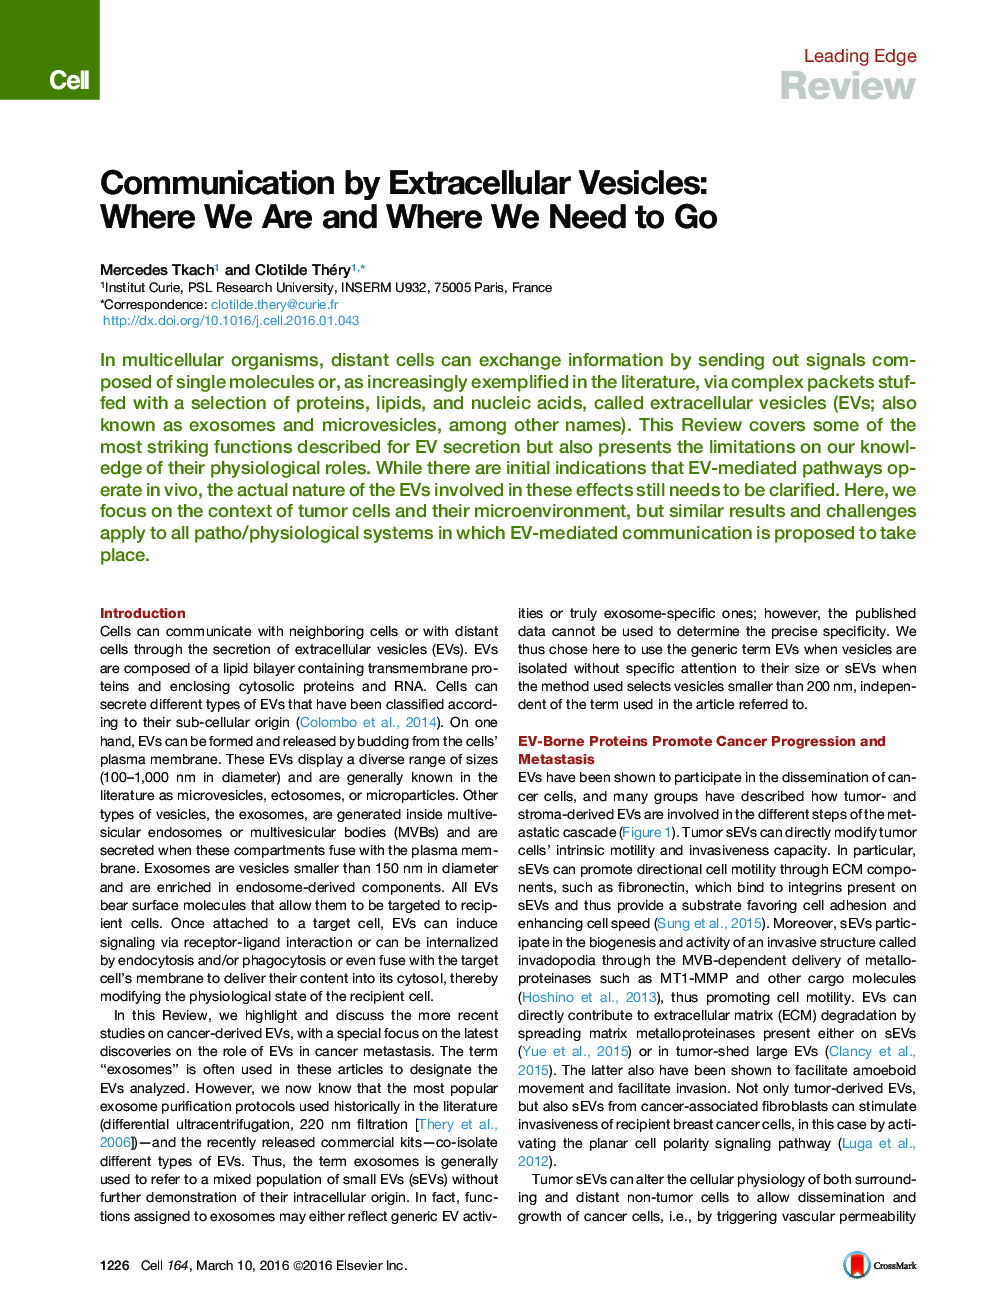 Communication by Extracellular Vesicles: Where We Are and Where We Need to Go